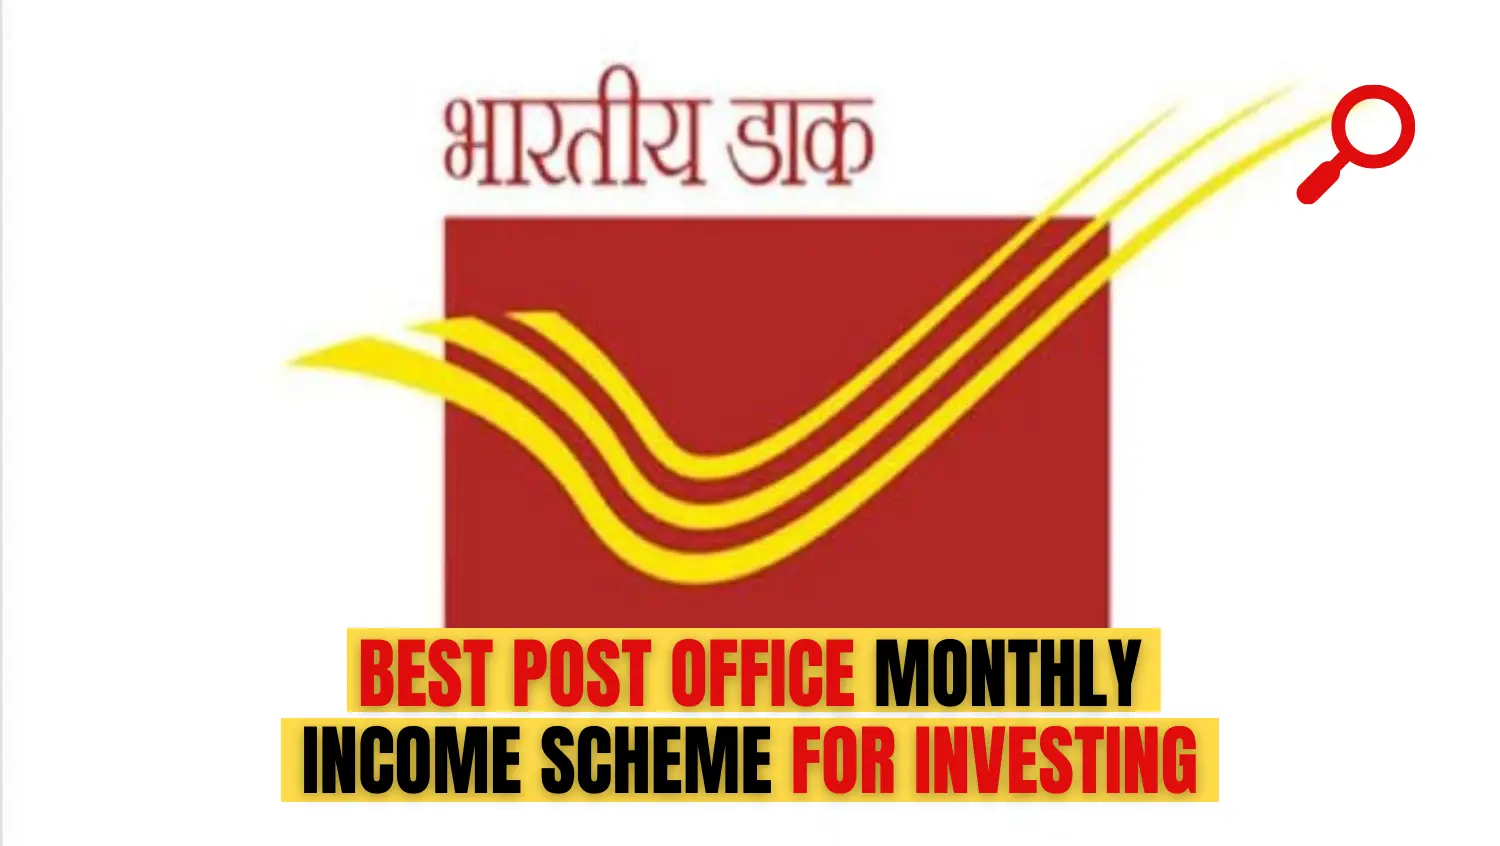 post office monthly income scheme